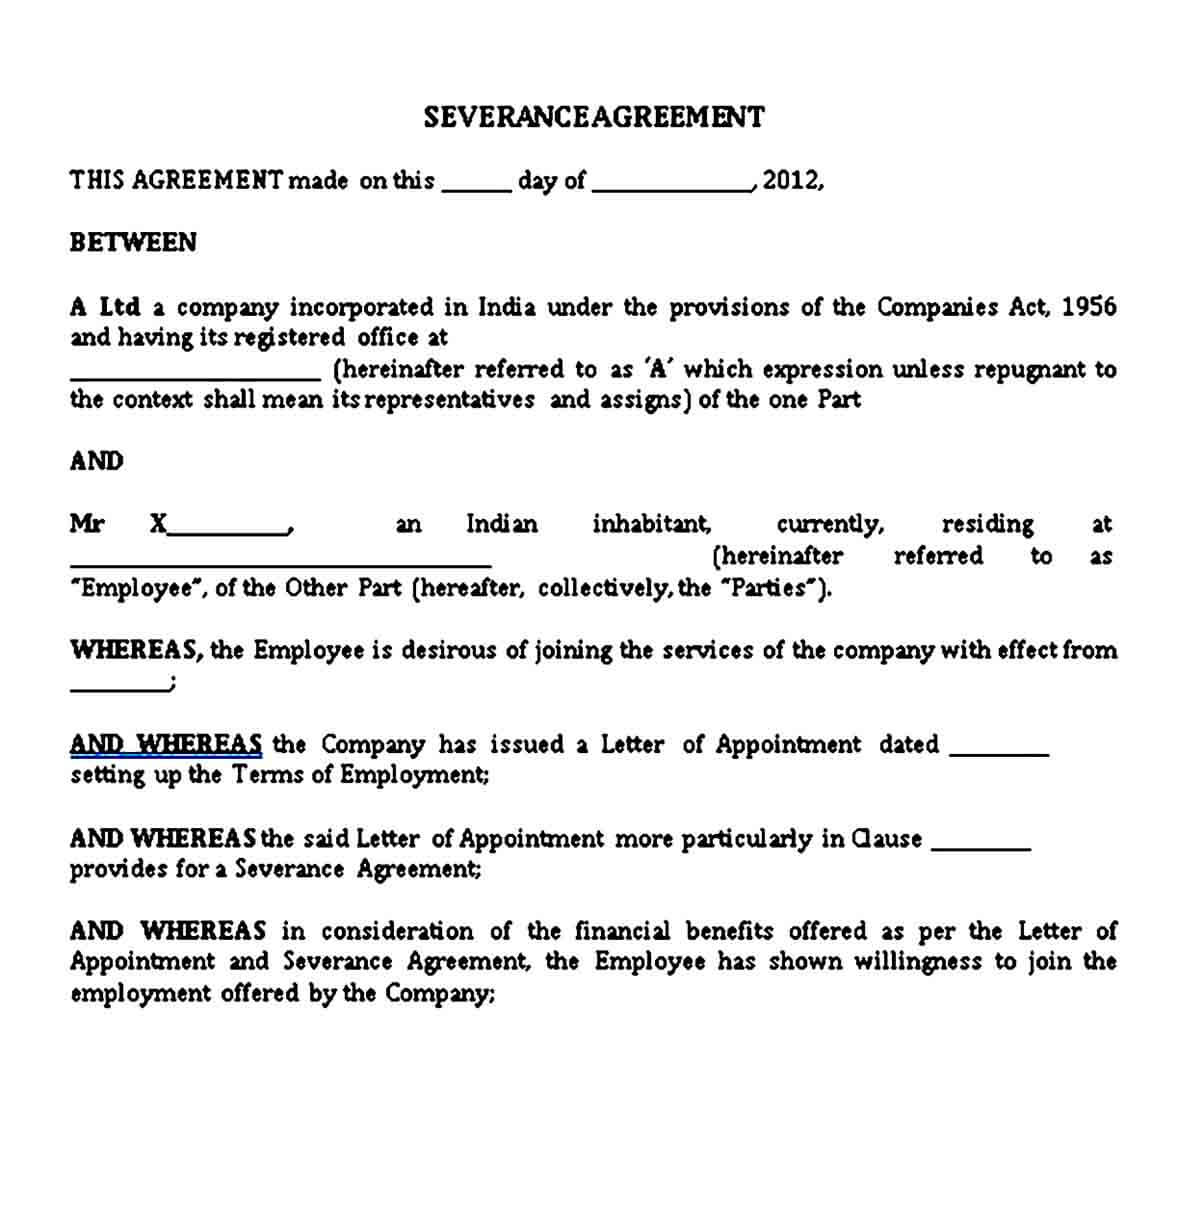 Draft of a Severance Agreement